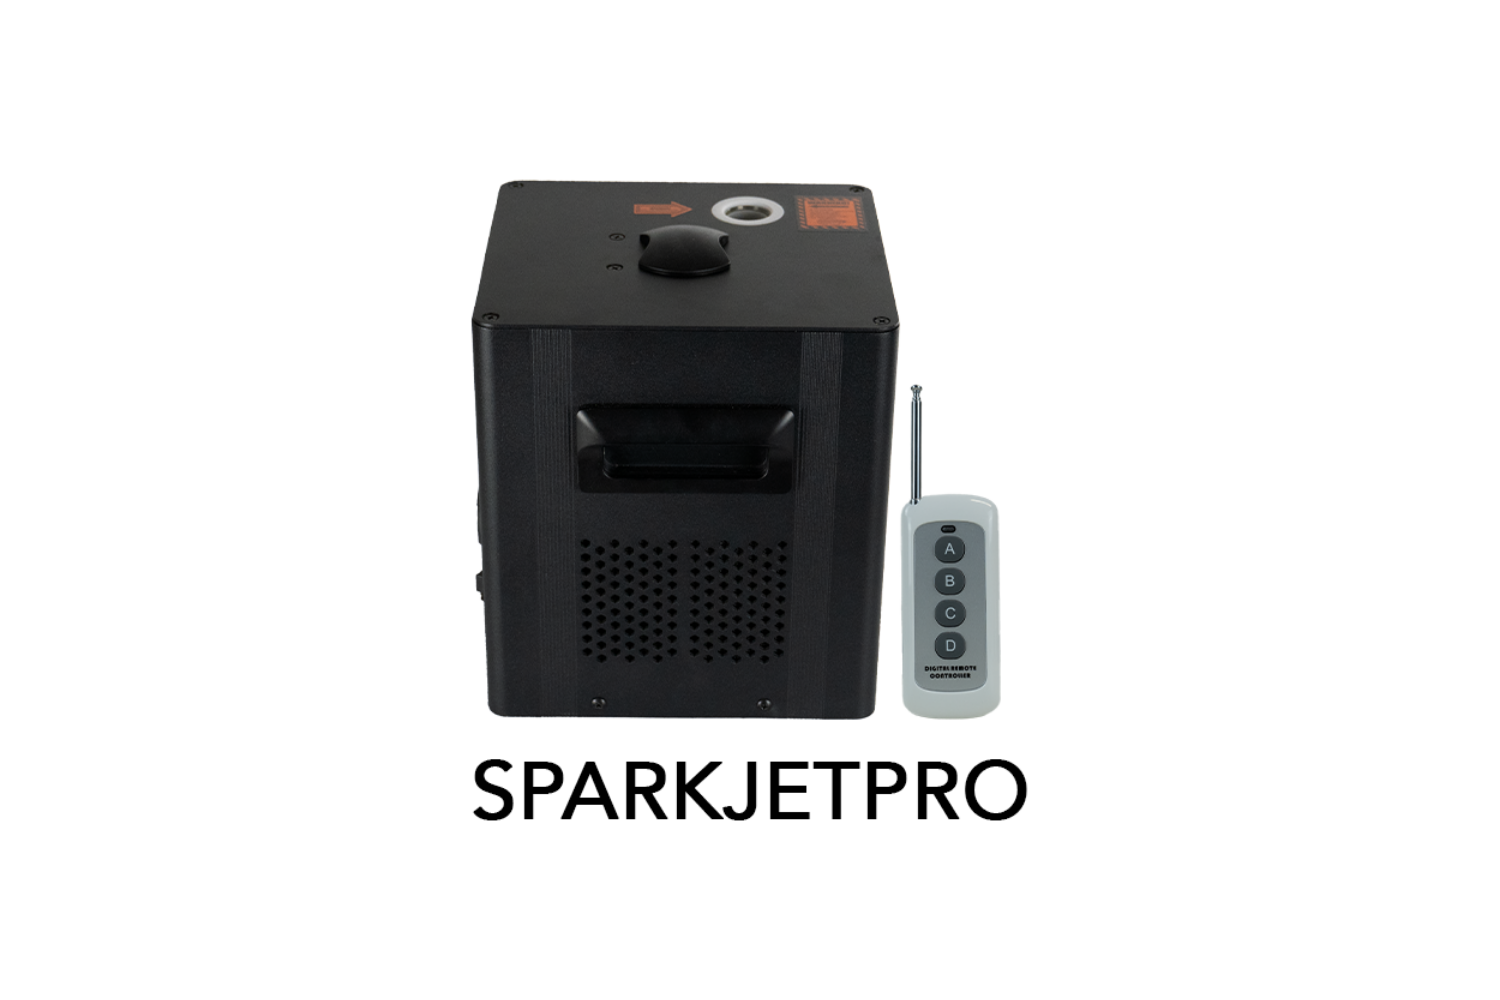 SPARKJETPRO with included RF Remote Now in Stock!